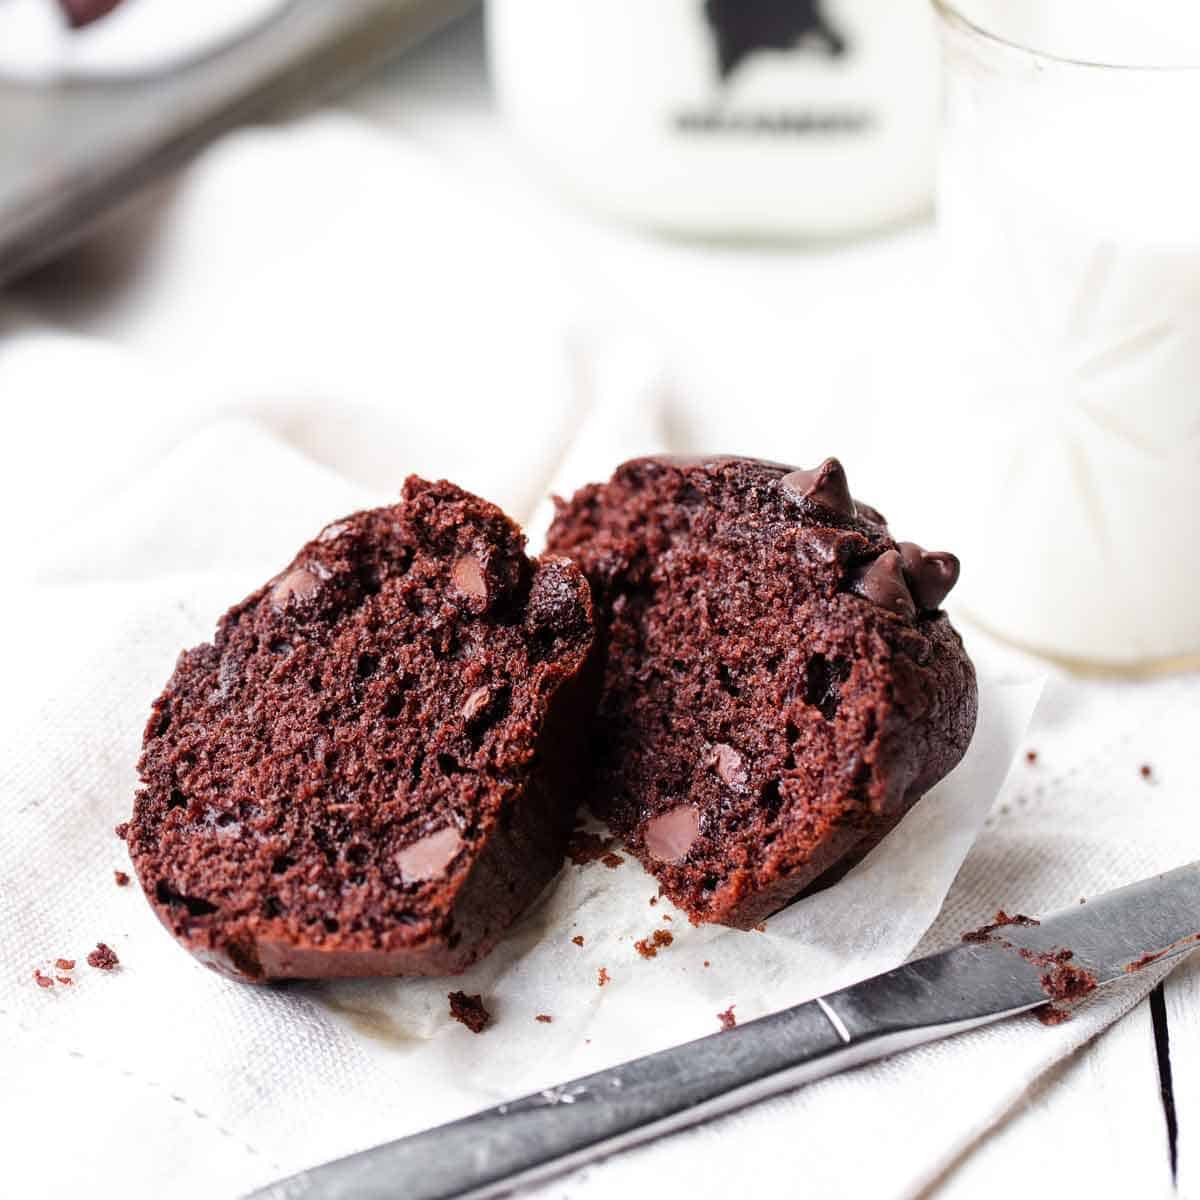 Moist double chocolate chip muffin cut in half with soft melted chocolate chips and a glass of milk in the background.